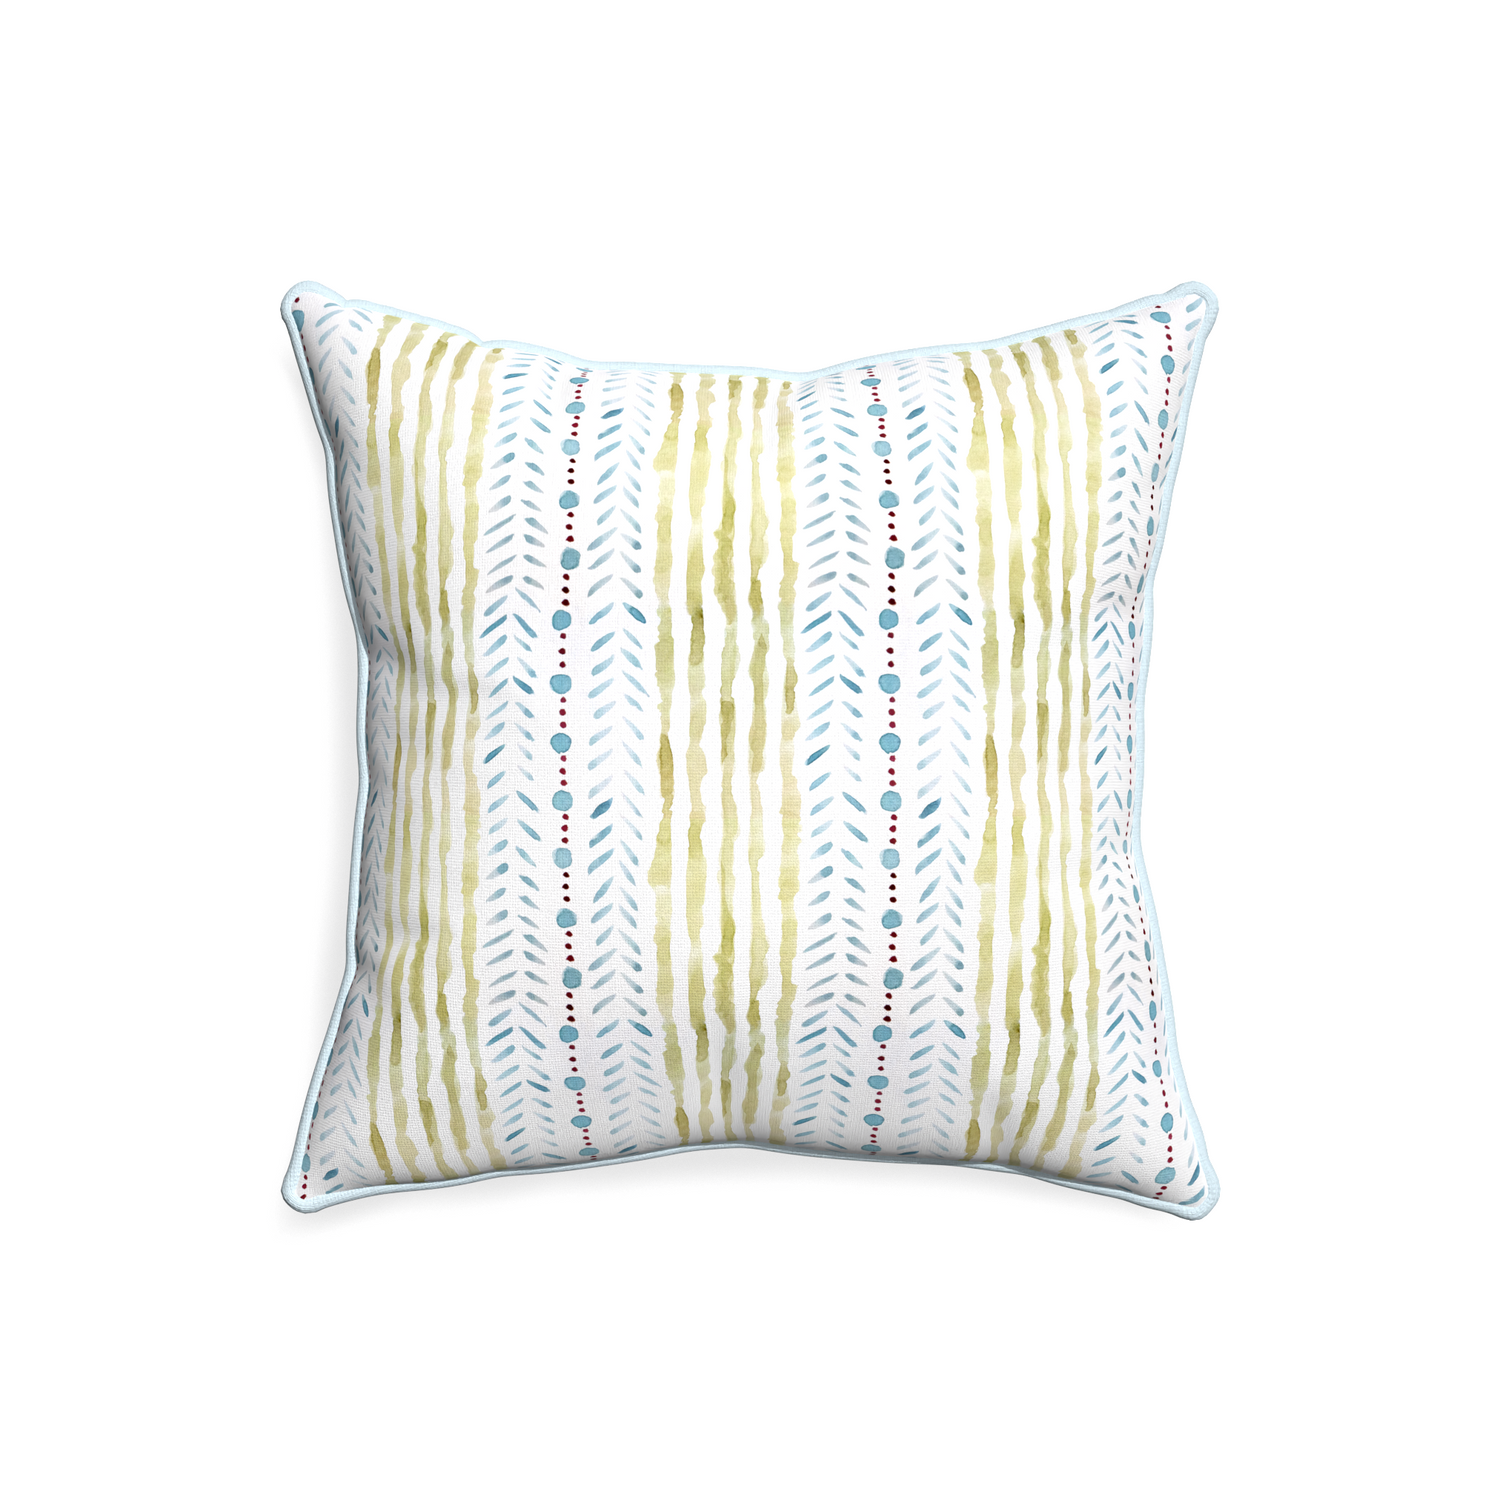 20-square julia custom pillow with powder piping on white background